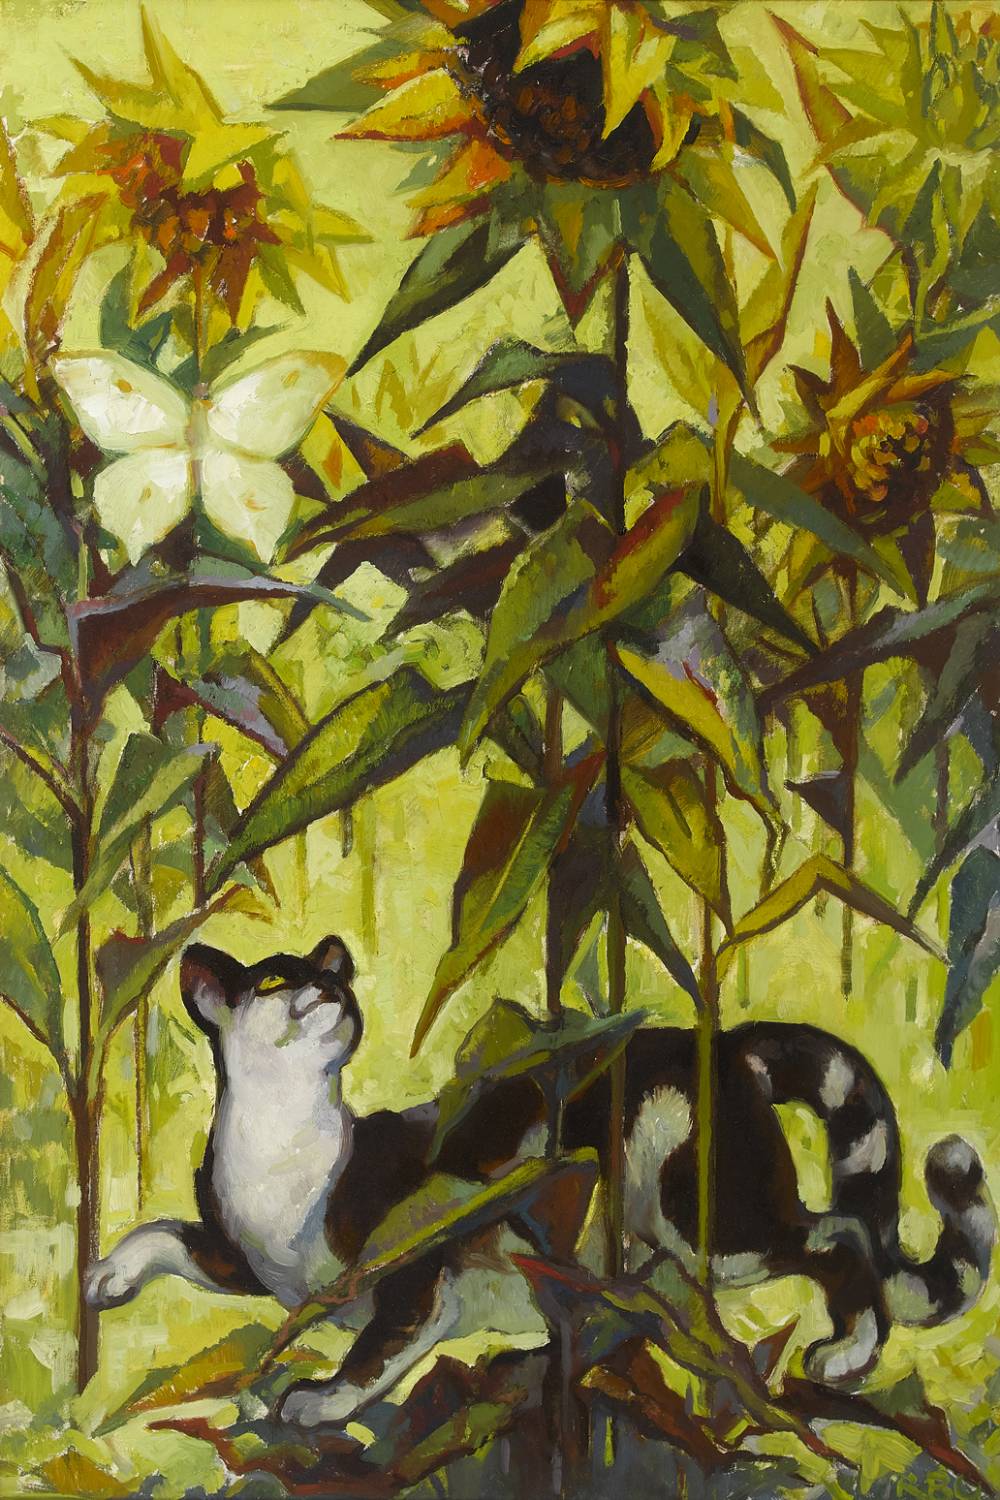 CAT AND SUNFLOWERS by Rosaleen Brigid Ganly sold for 1,200 at Whyte's Auctions